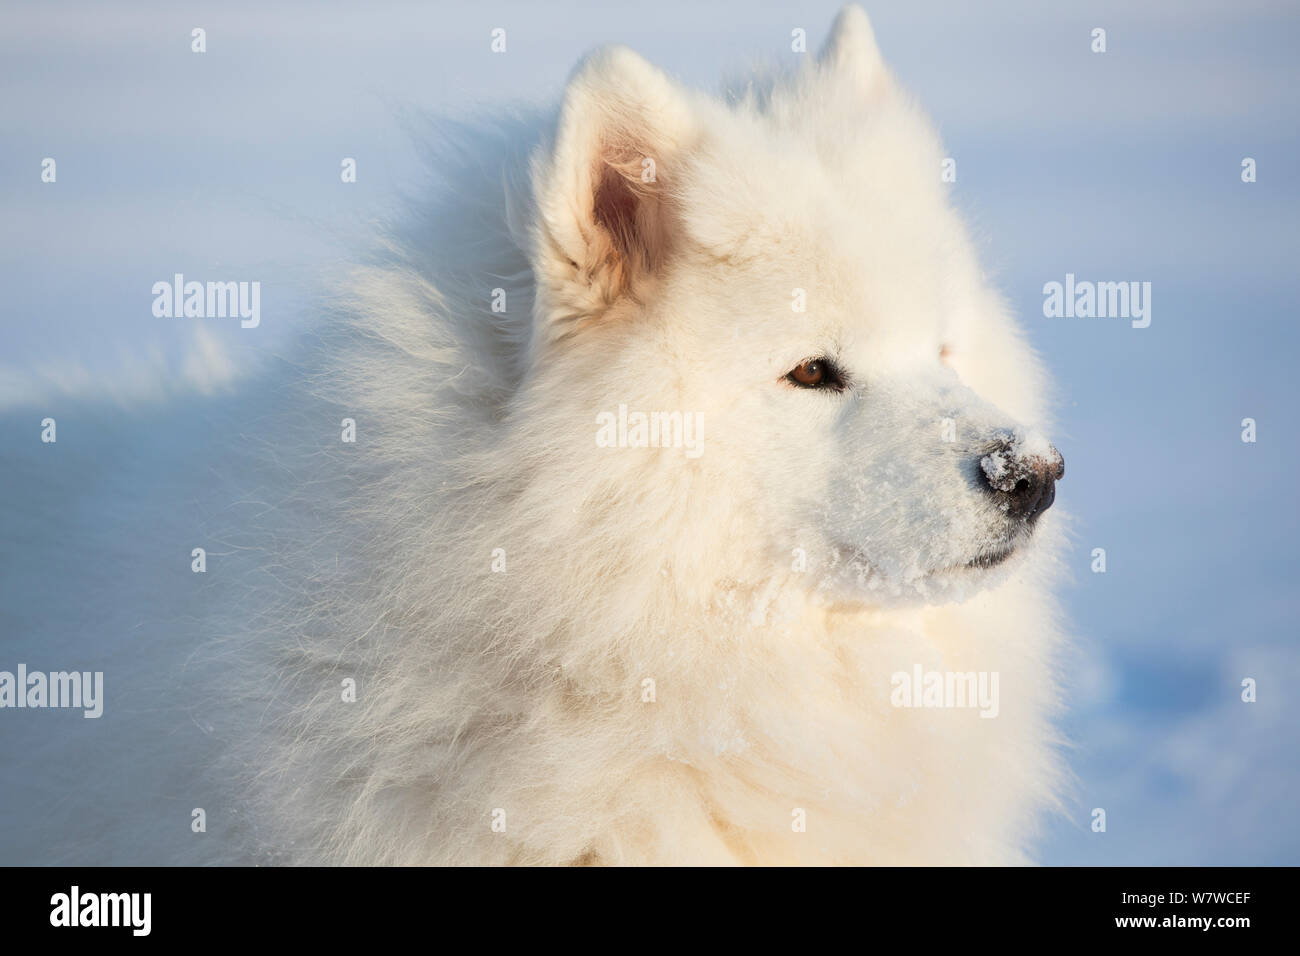 Samoyed dog in snow, Ledyard, Connecticut, USA. Non exclusive. Stock Photo